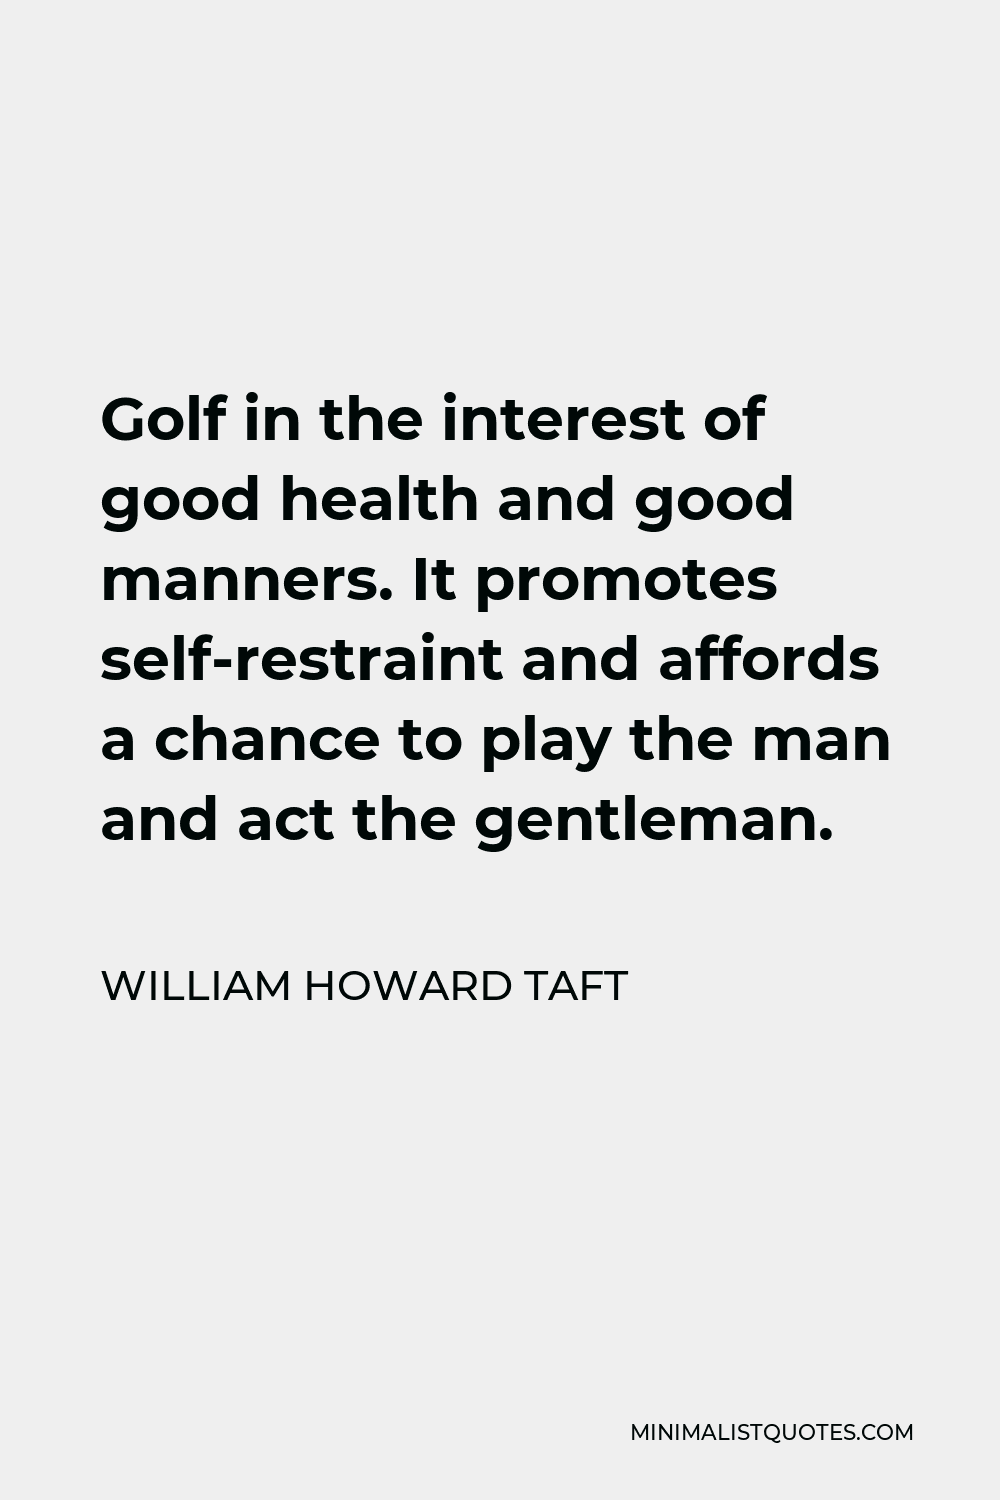 William Howard Taft Quote - Golf in the interest of good health and good manners. It promotes self-restraint and affords a chance to play the man and act the gentleman.